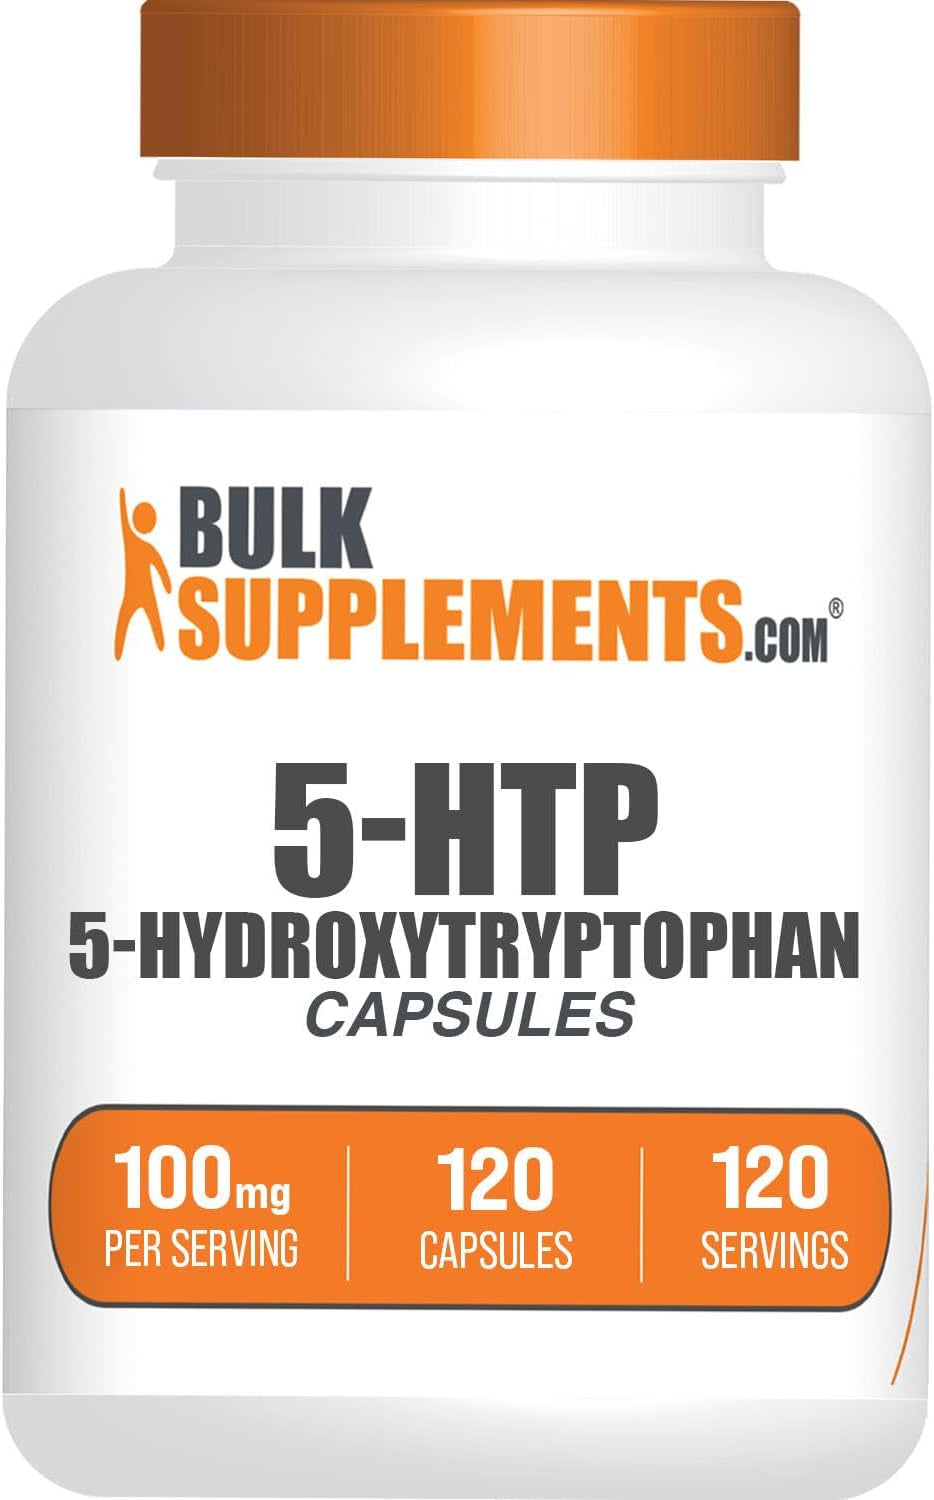 BULKSUPPLEMENTS.COM 5-HTP 100Mg - 5-Hydroxytryptophan, 5 HTP Supplement, 5HTP 100Mg - HTP5 Supplement, Griffonia Seed Extract - Mood Support Supplement, 1 Capsule per Serving, 120 Capsules